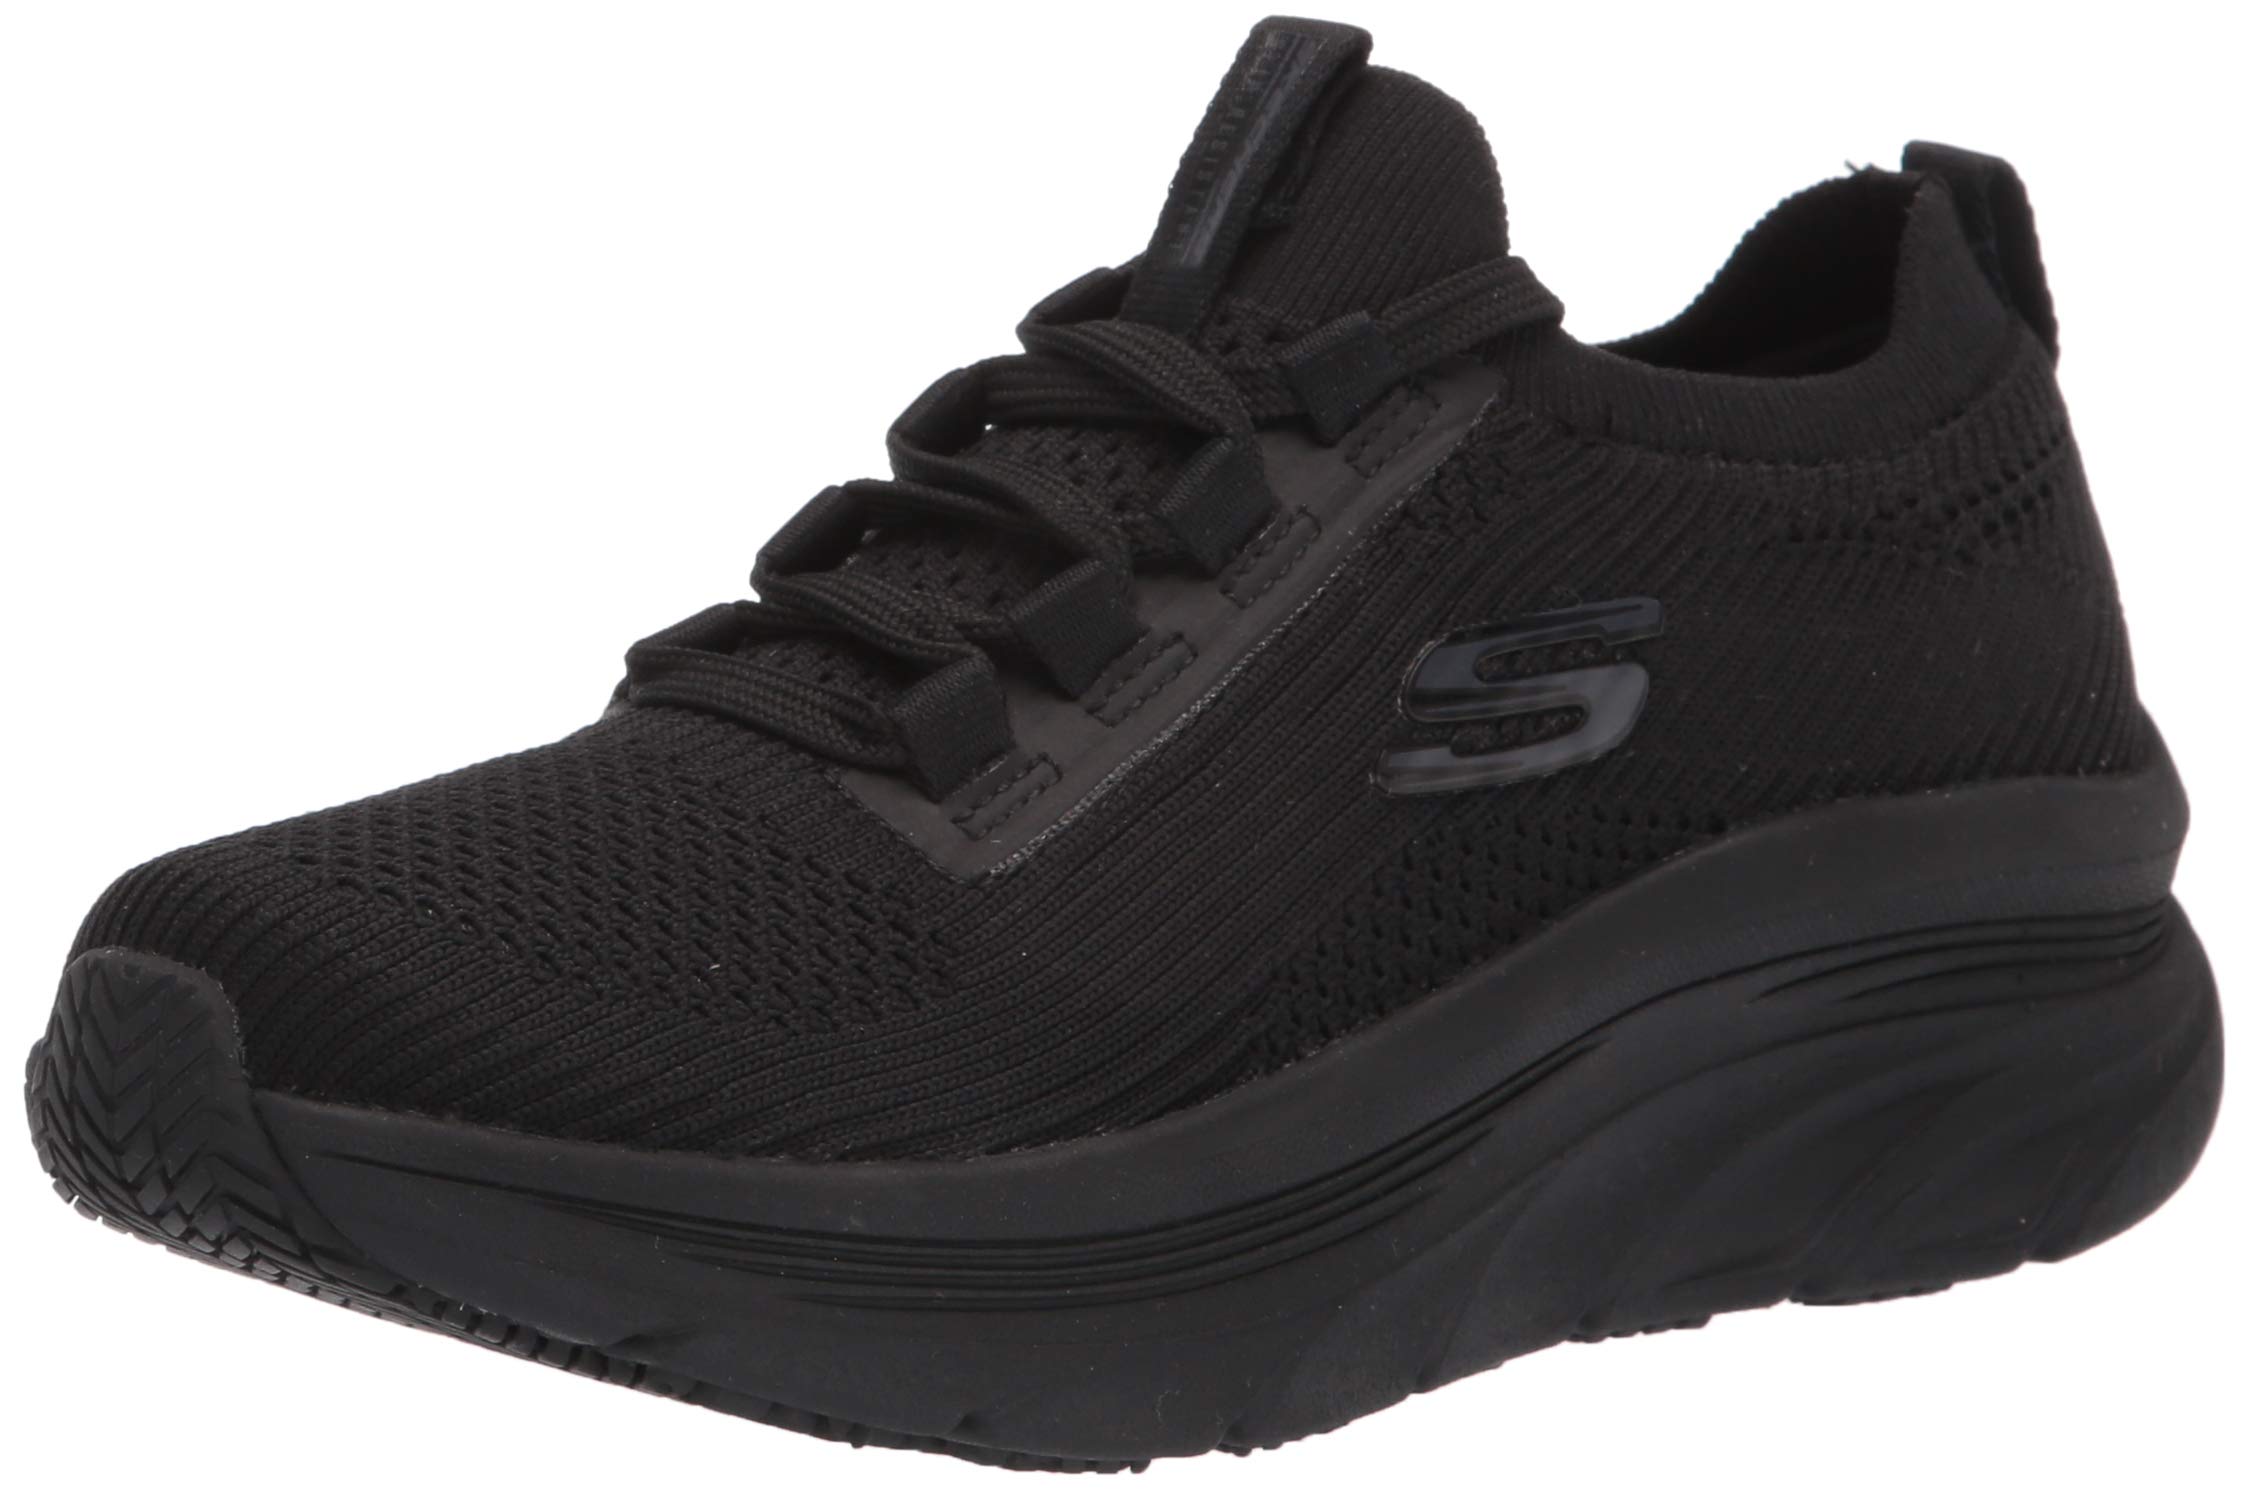 Skechers Women's Slip on Athletic Styling Health Care Professional Shoe